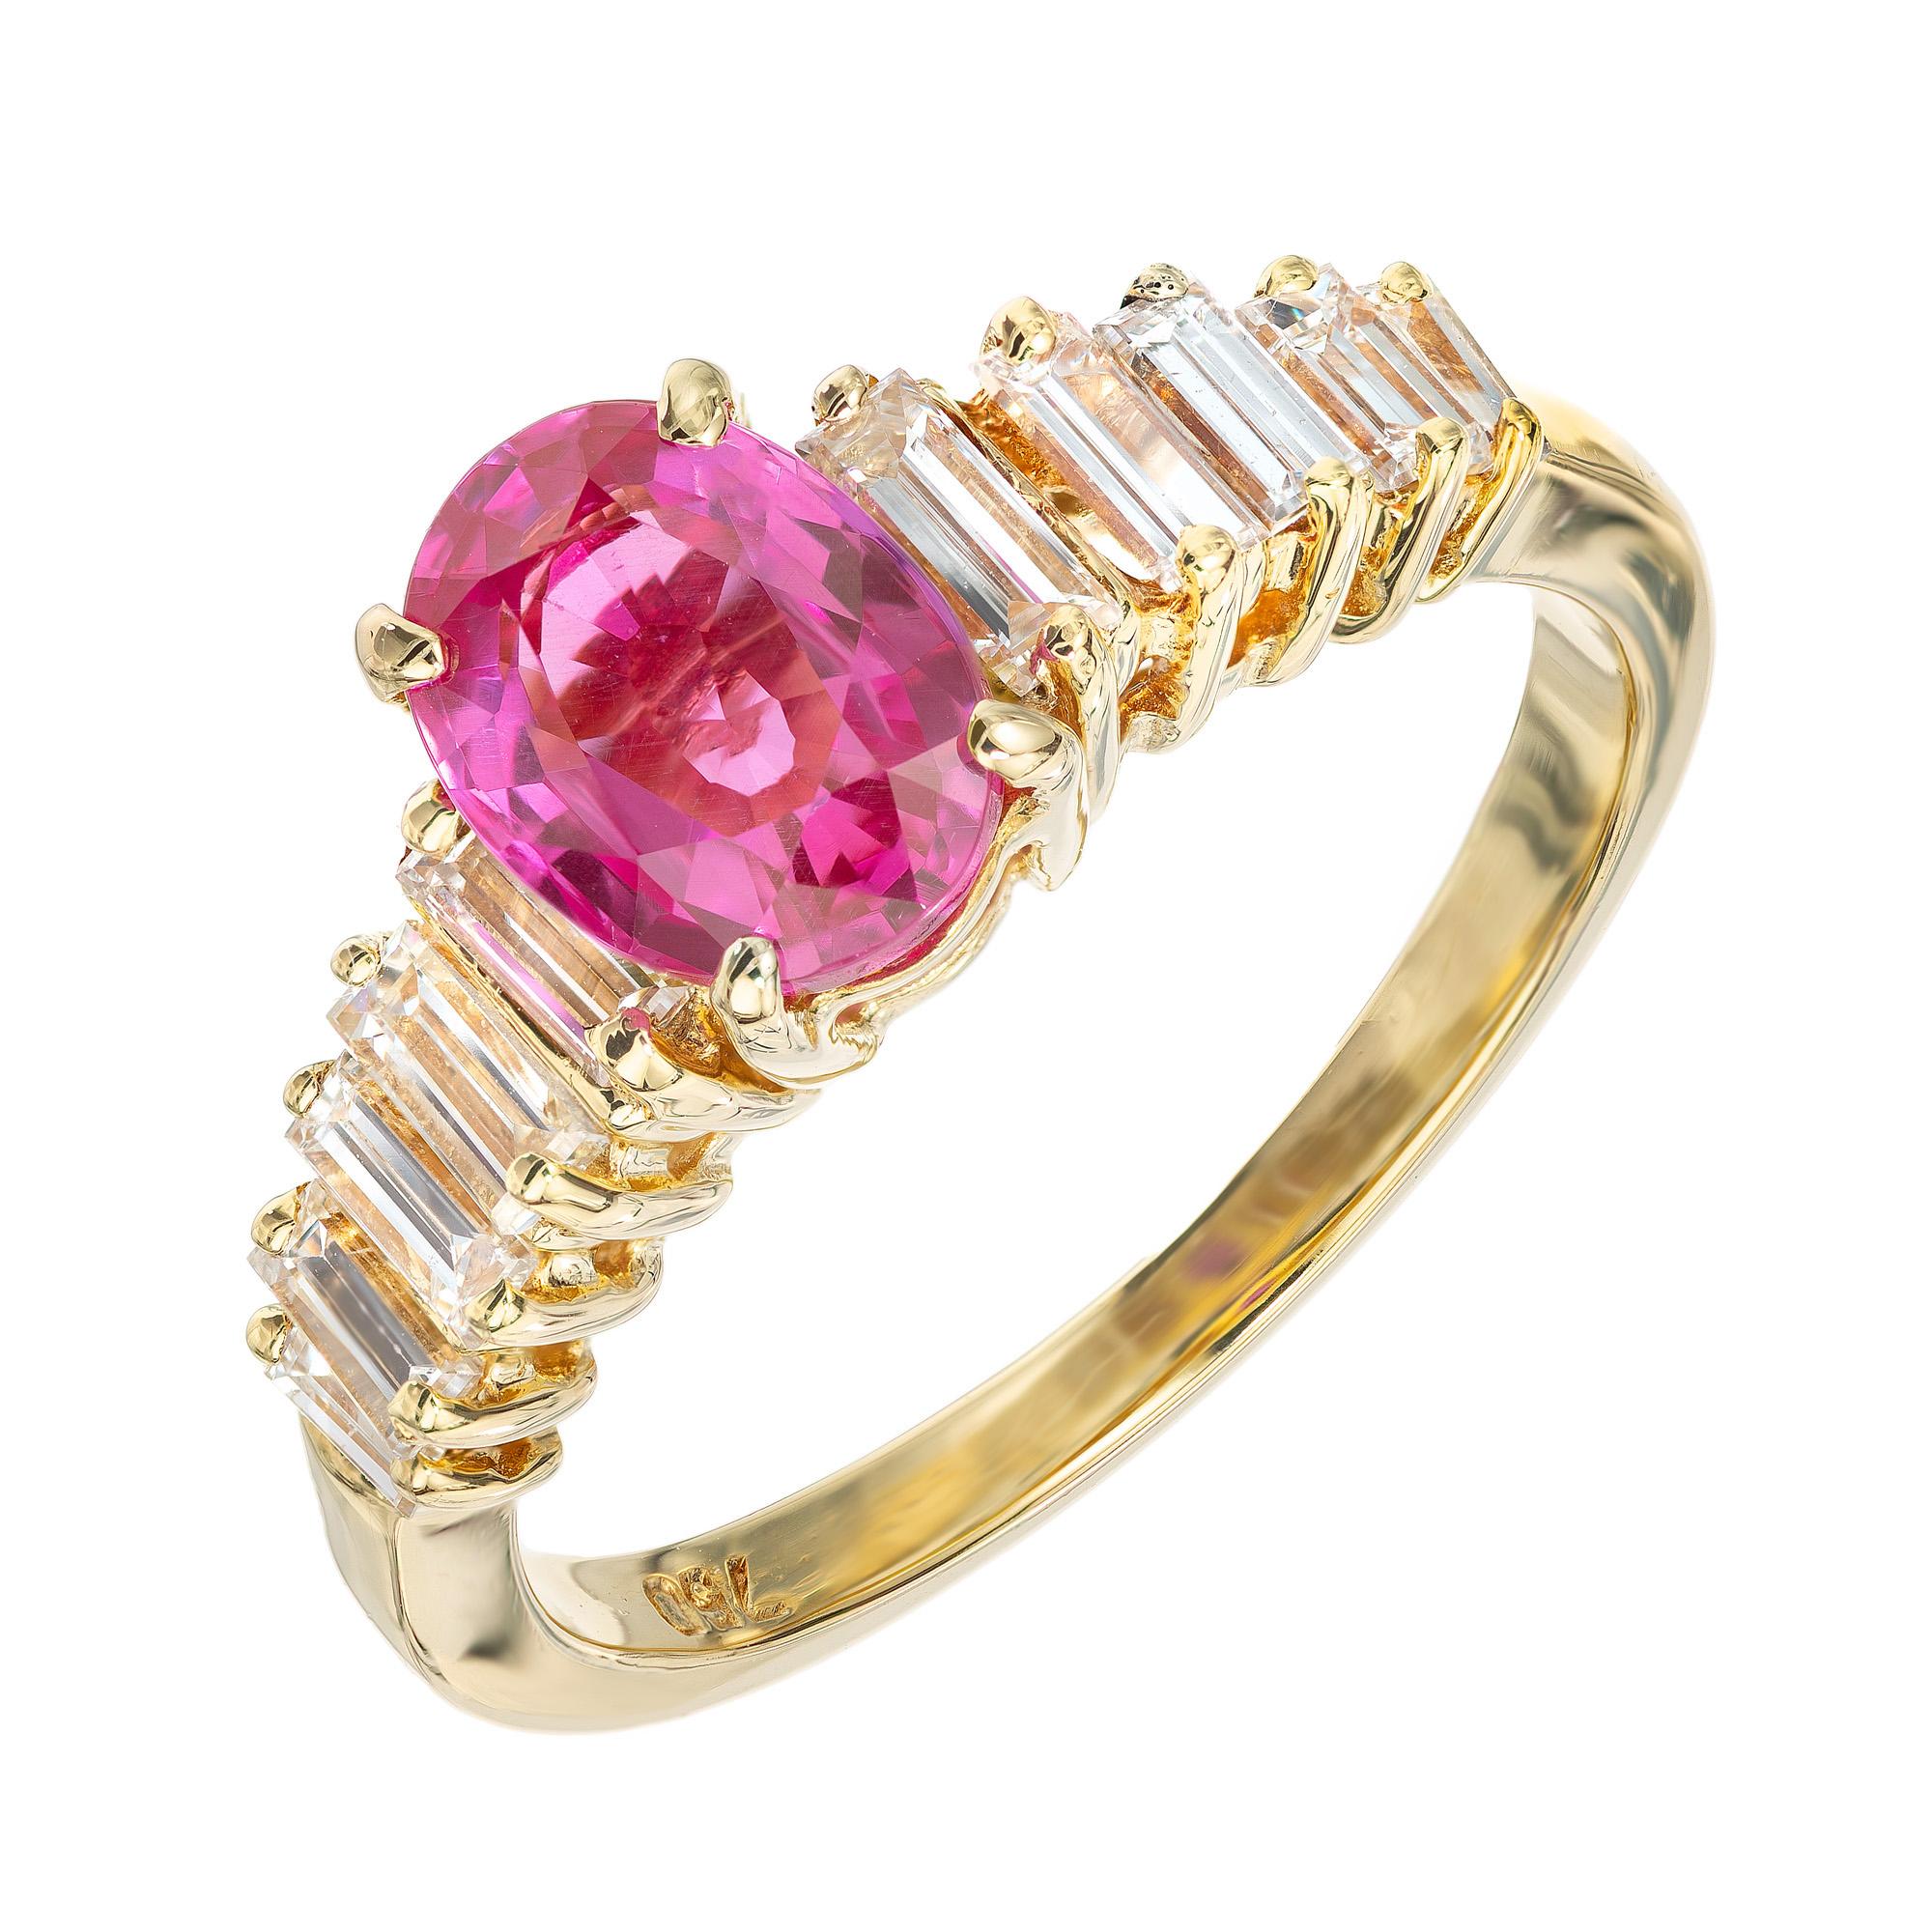 Bright pink sapphire and diamond engagement ring. Mounted in this 18k yellow gold setting is a rich vibrant pink oval 1.20ct sapphire, which is accented by 10 graduated straight baguette diamonds. The sapphire is certified by the AGL as natural, no